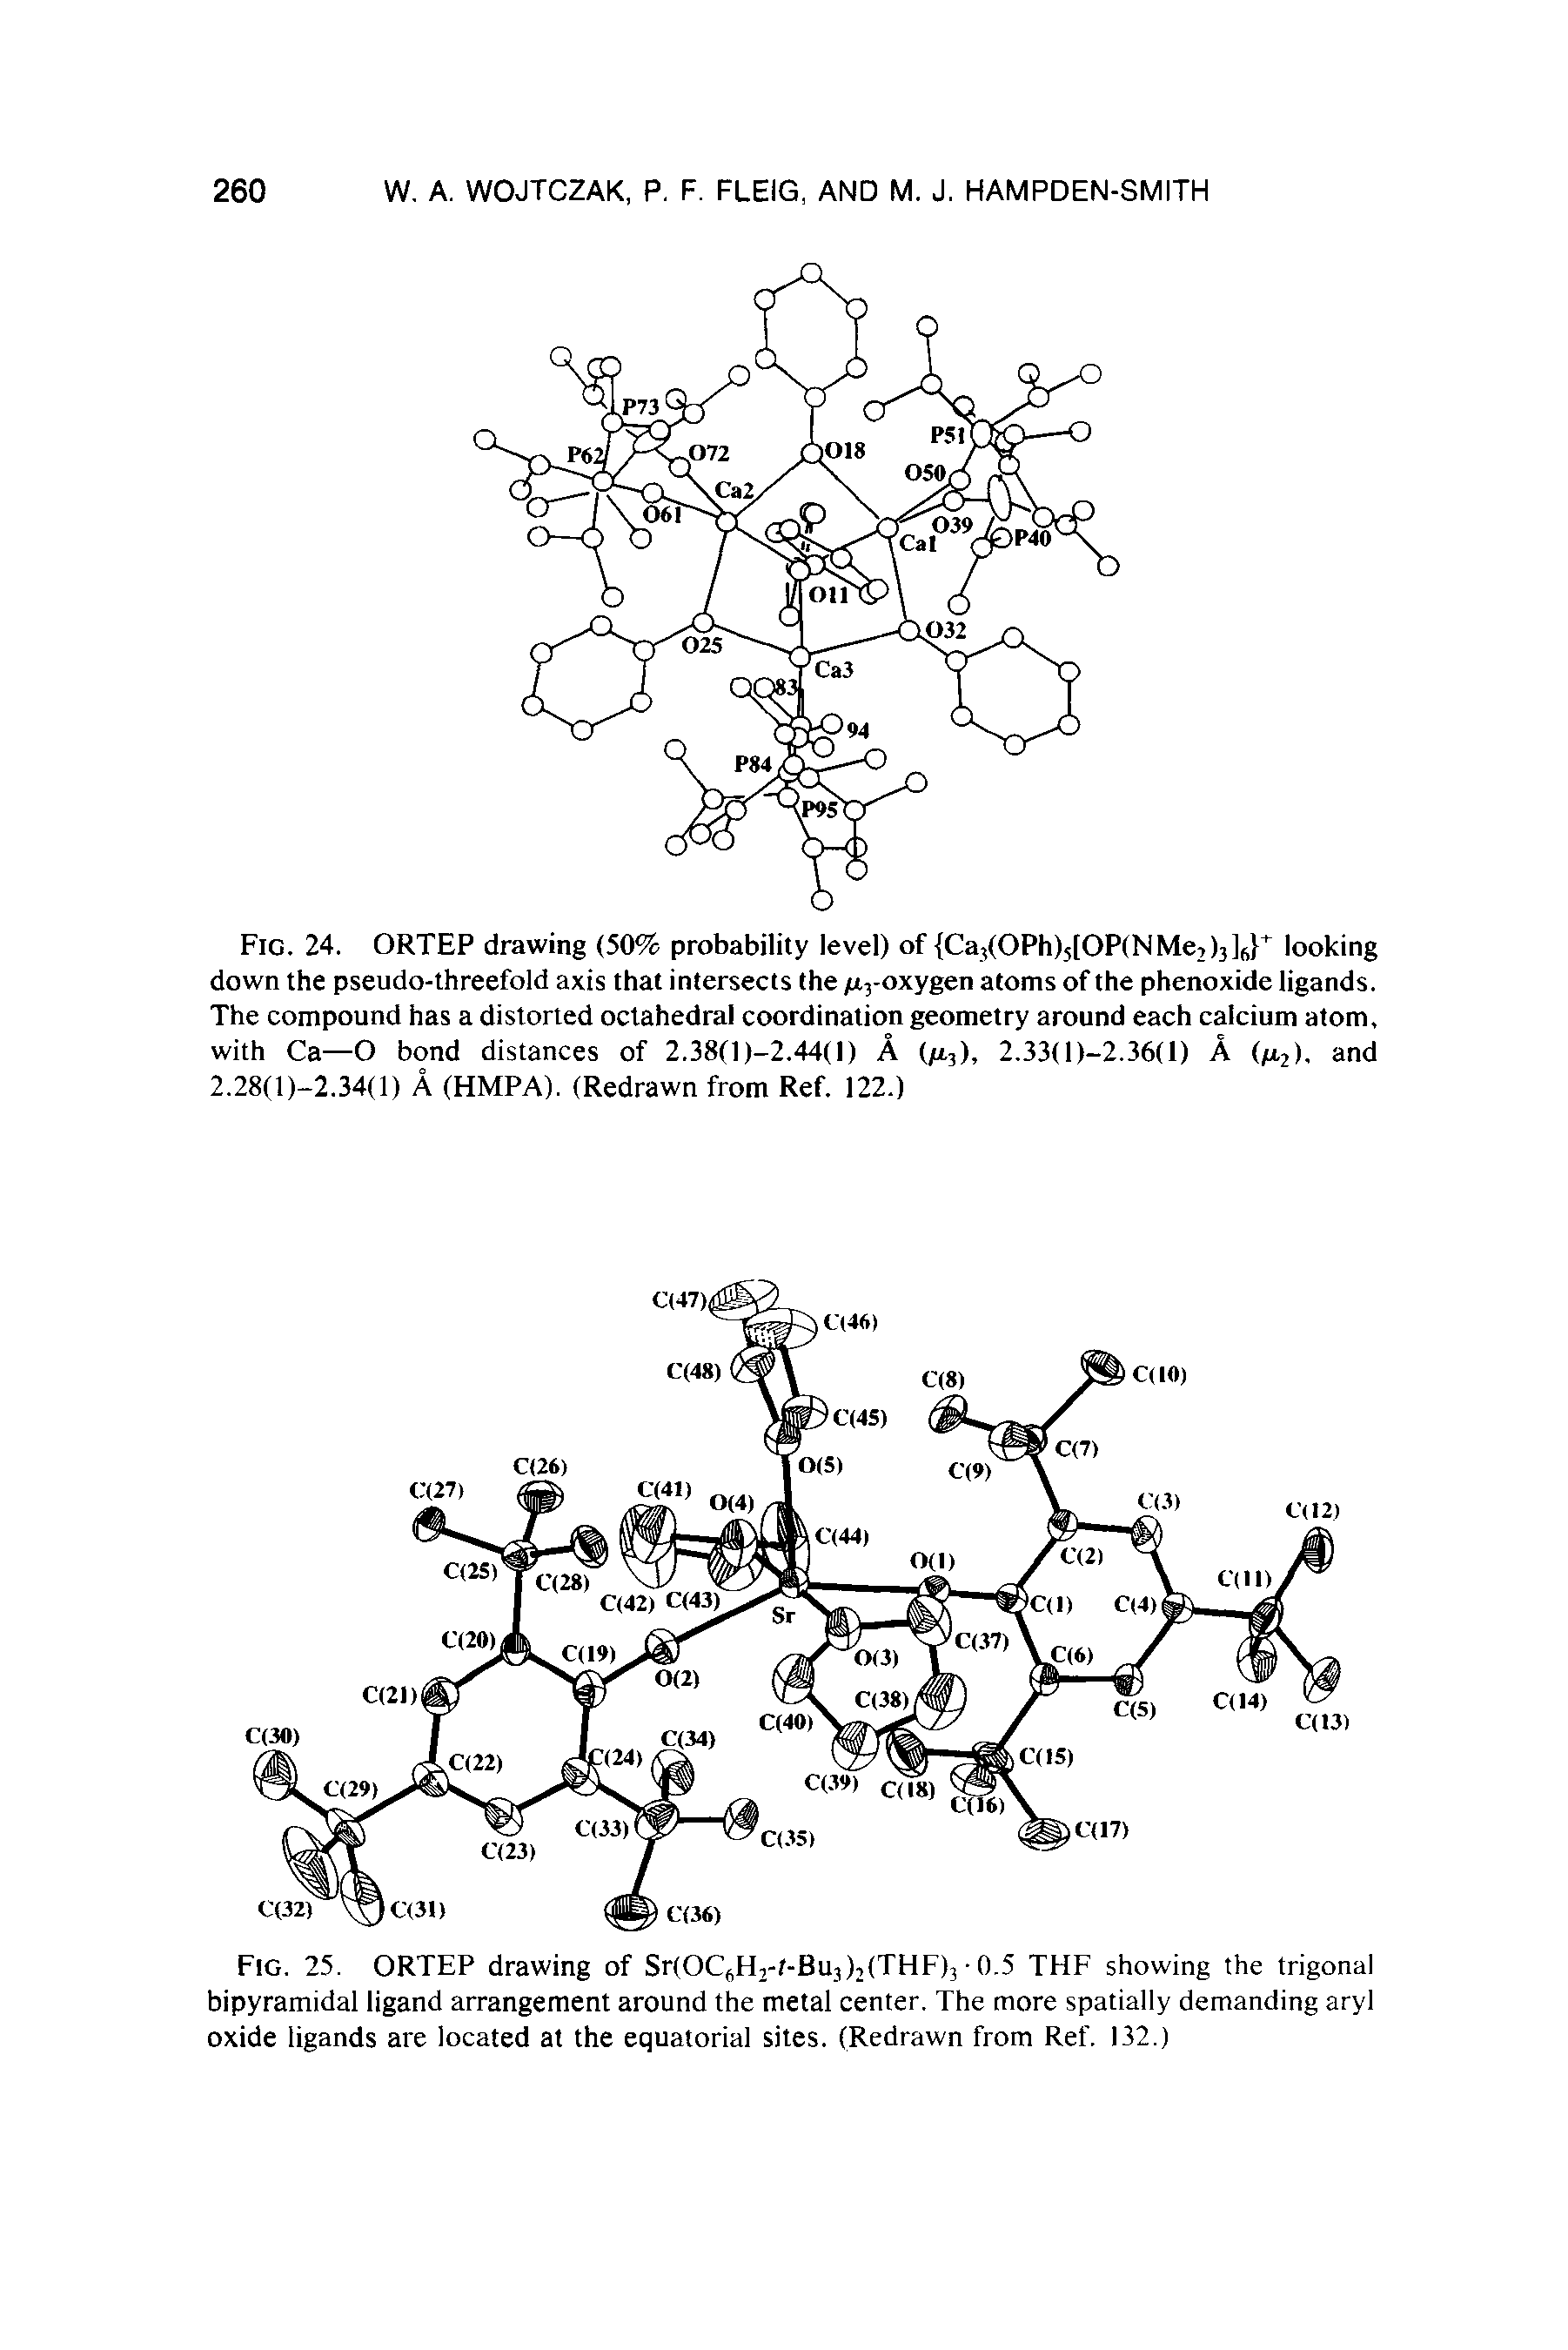 Fig. 25. ORTEP drawing of Sr(OC6H2- -Bu1)2(THF) 0.5 THF showing the trigonal bipyramidal ligand arrangement around the metal center. The more spatially demanding aryl oxide ligands are located at the equatorial sites. (Redrawn from Ref. I32.)...